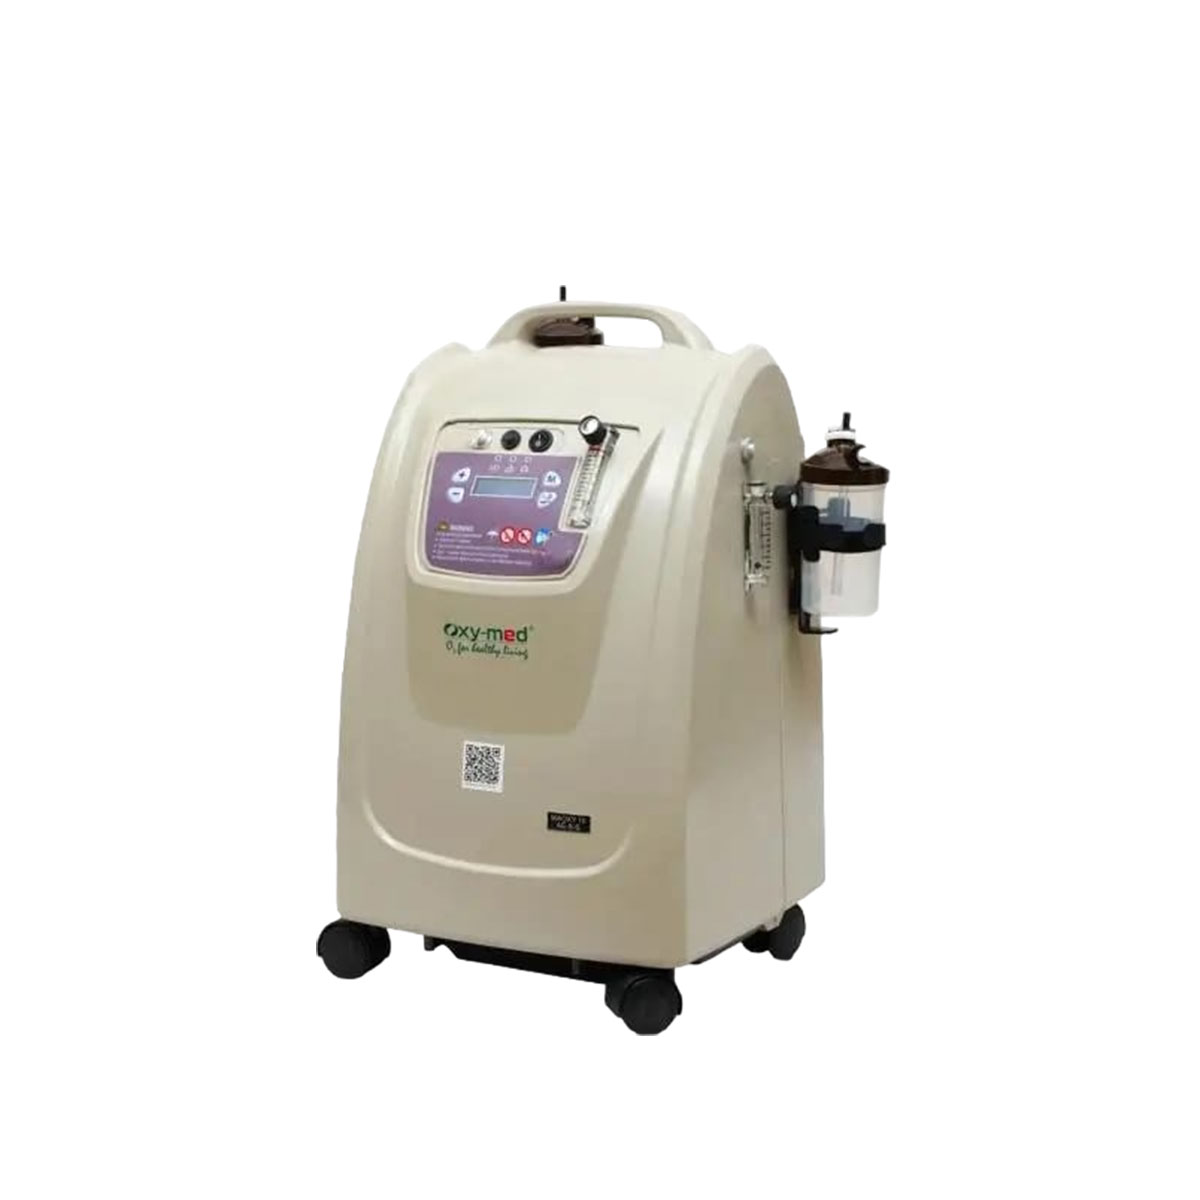 10 Lpm Oxymed Oxygen Concentrator On Sale Suppliers, Service Provider in Army welfare housing organisation